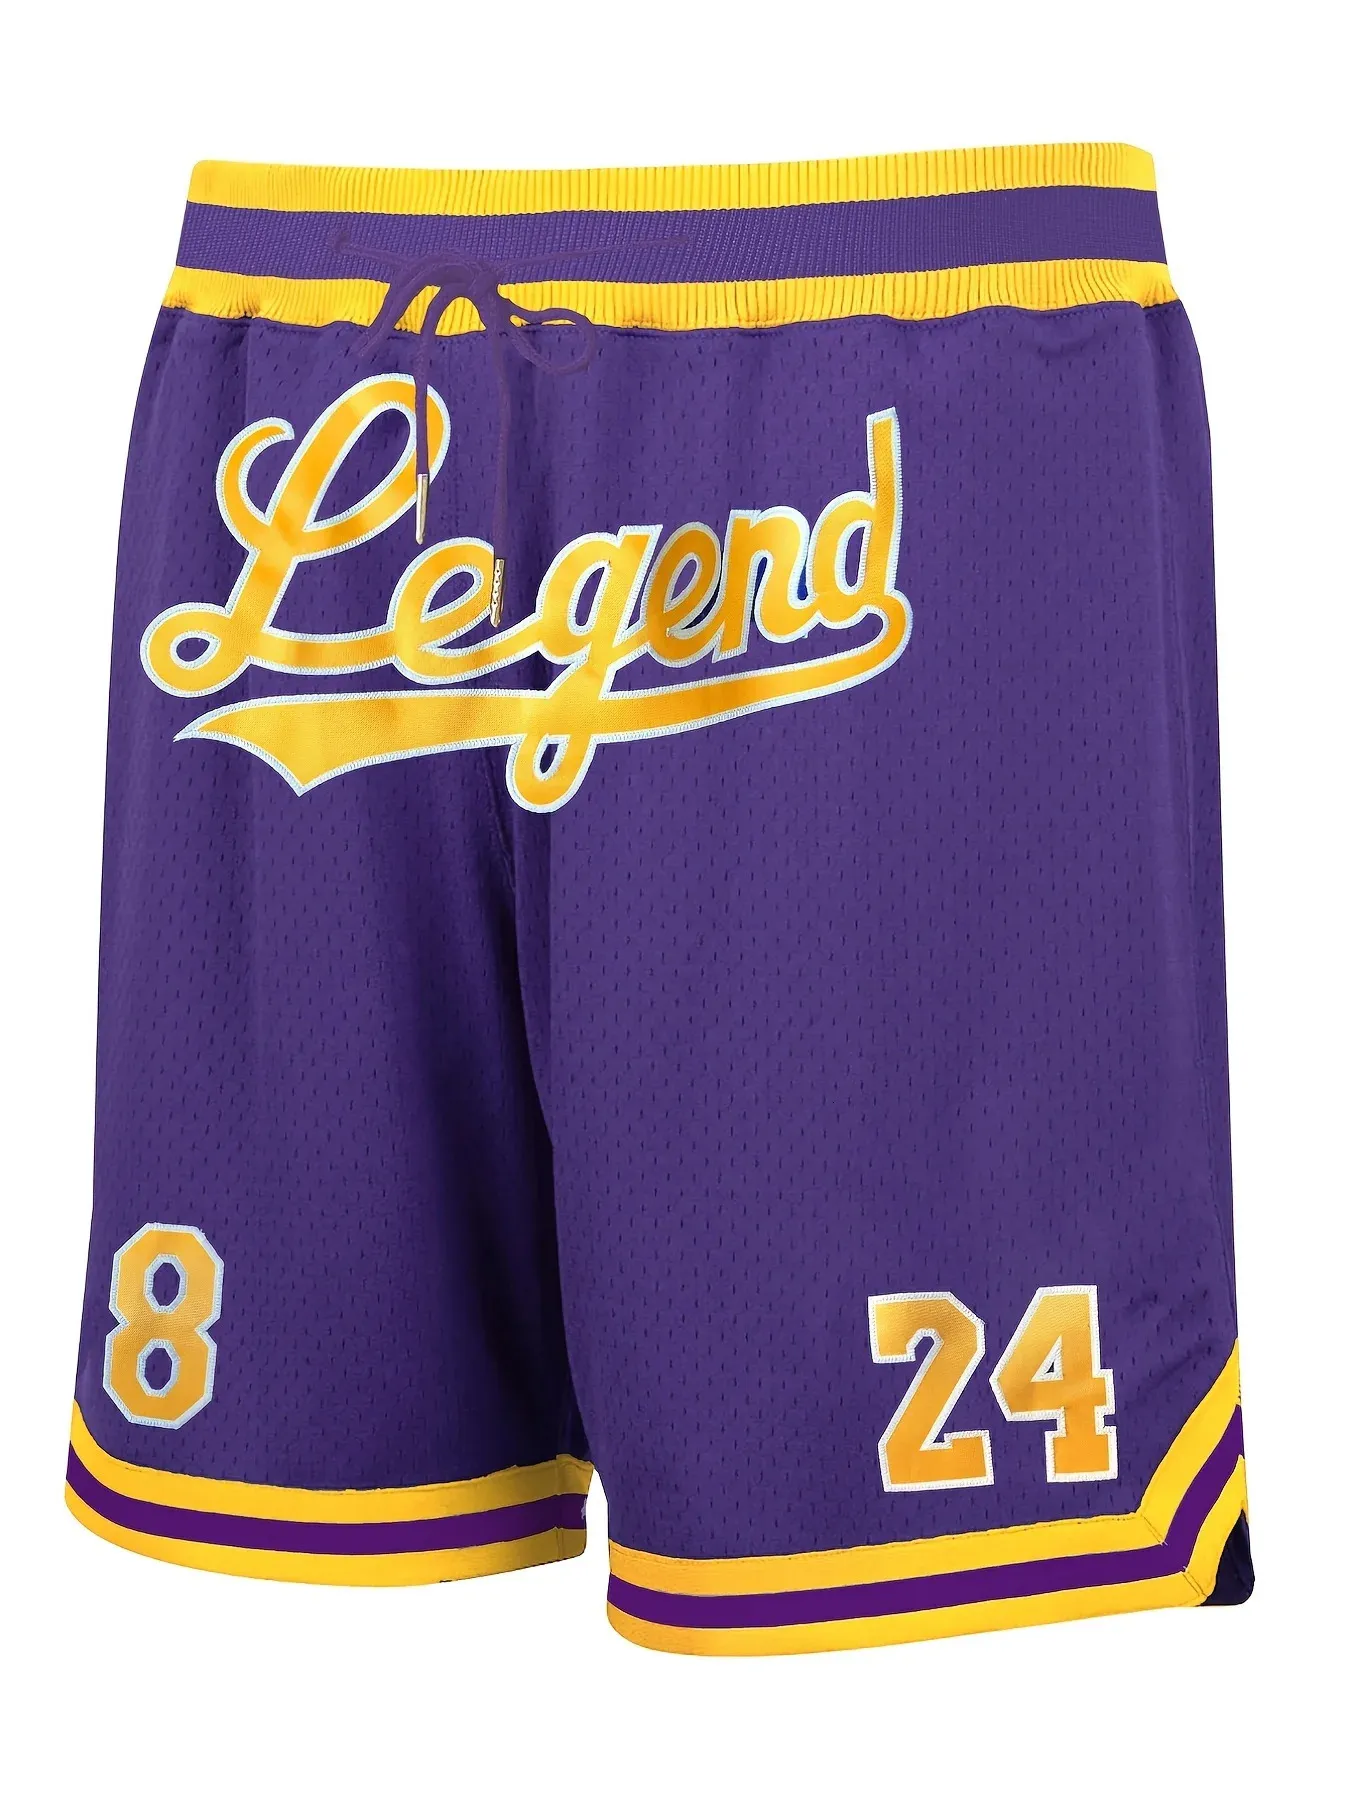 Mens Quick Dry Loose Legend 8 24 Shorts Stretch Breathable Moisture Drawstring For Basketball Training Running 240403